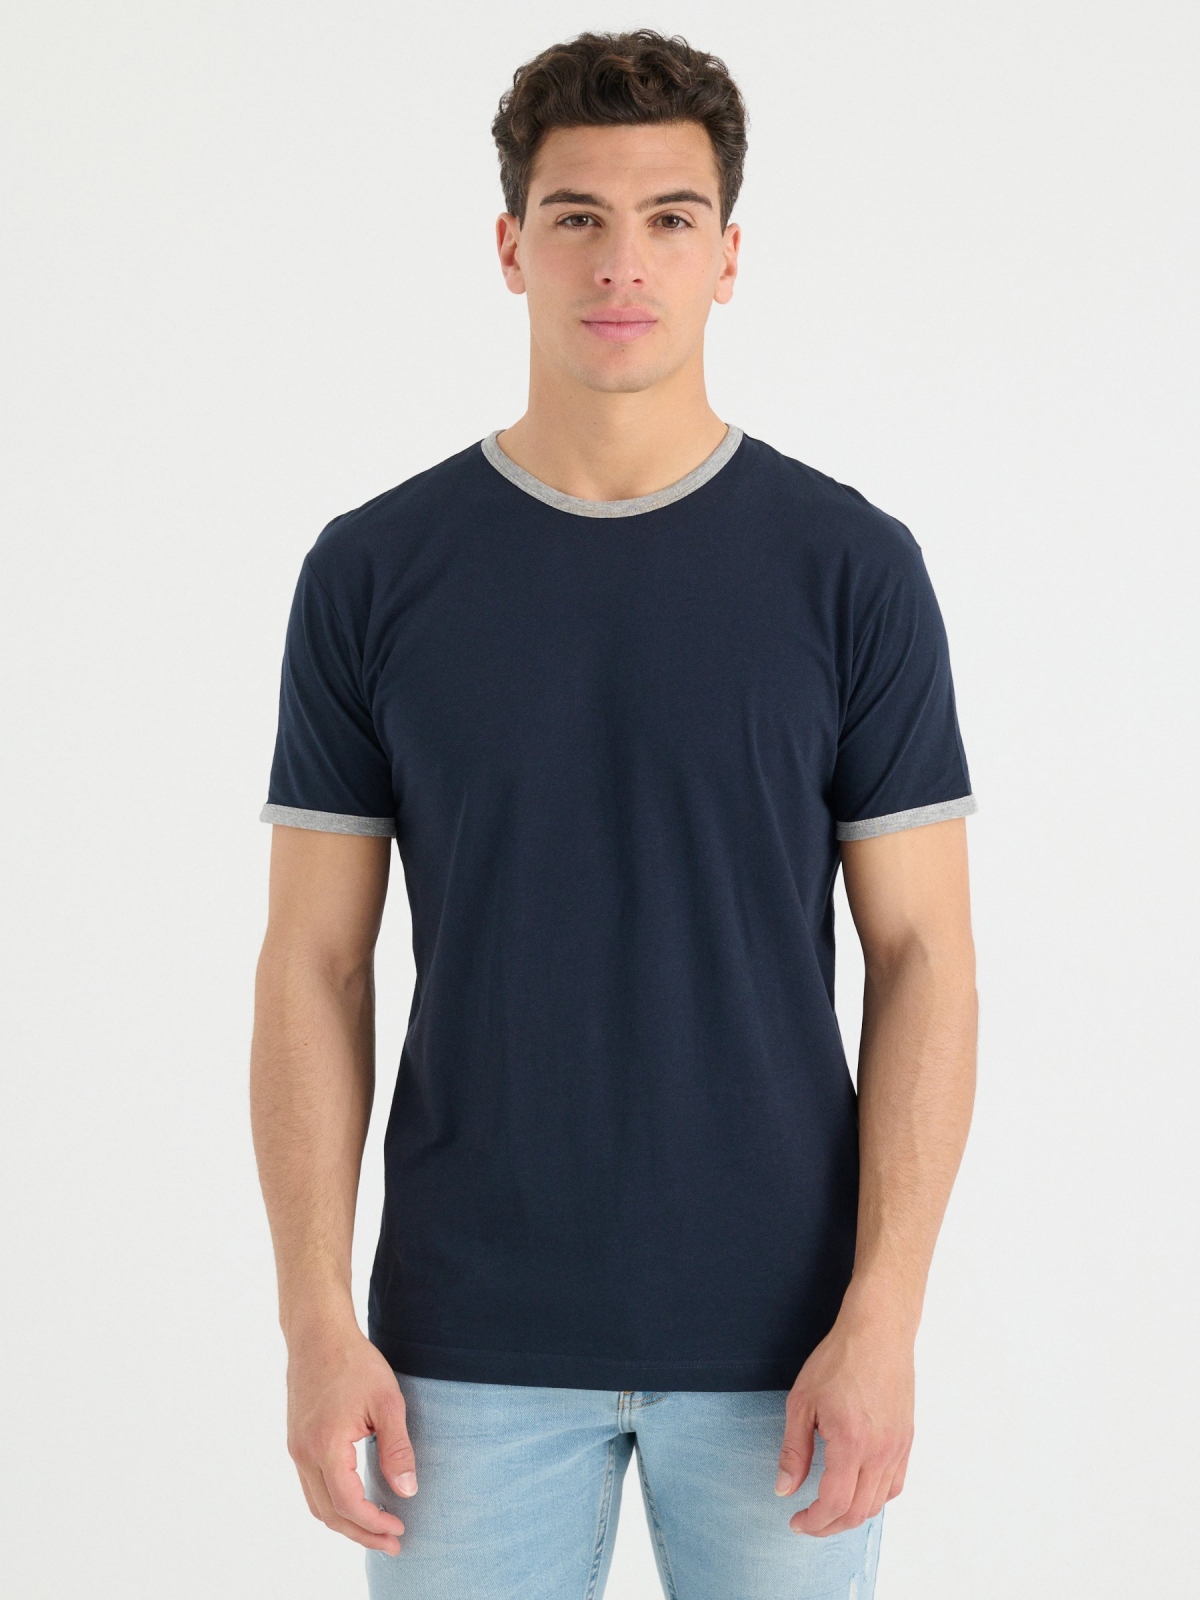 Basic T-shirt contrasts navy middle front view